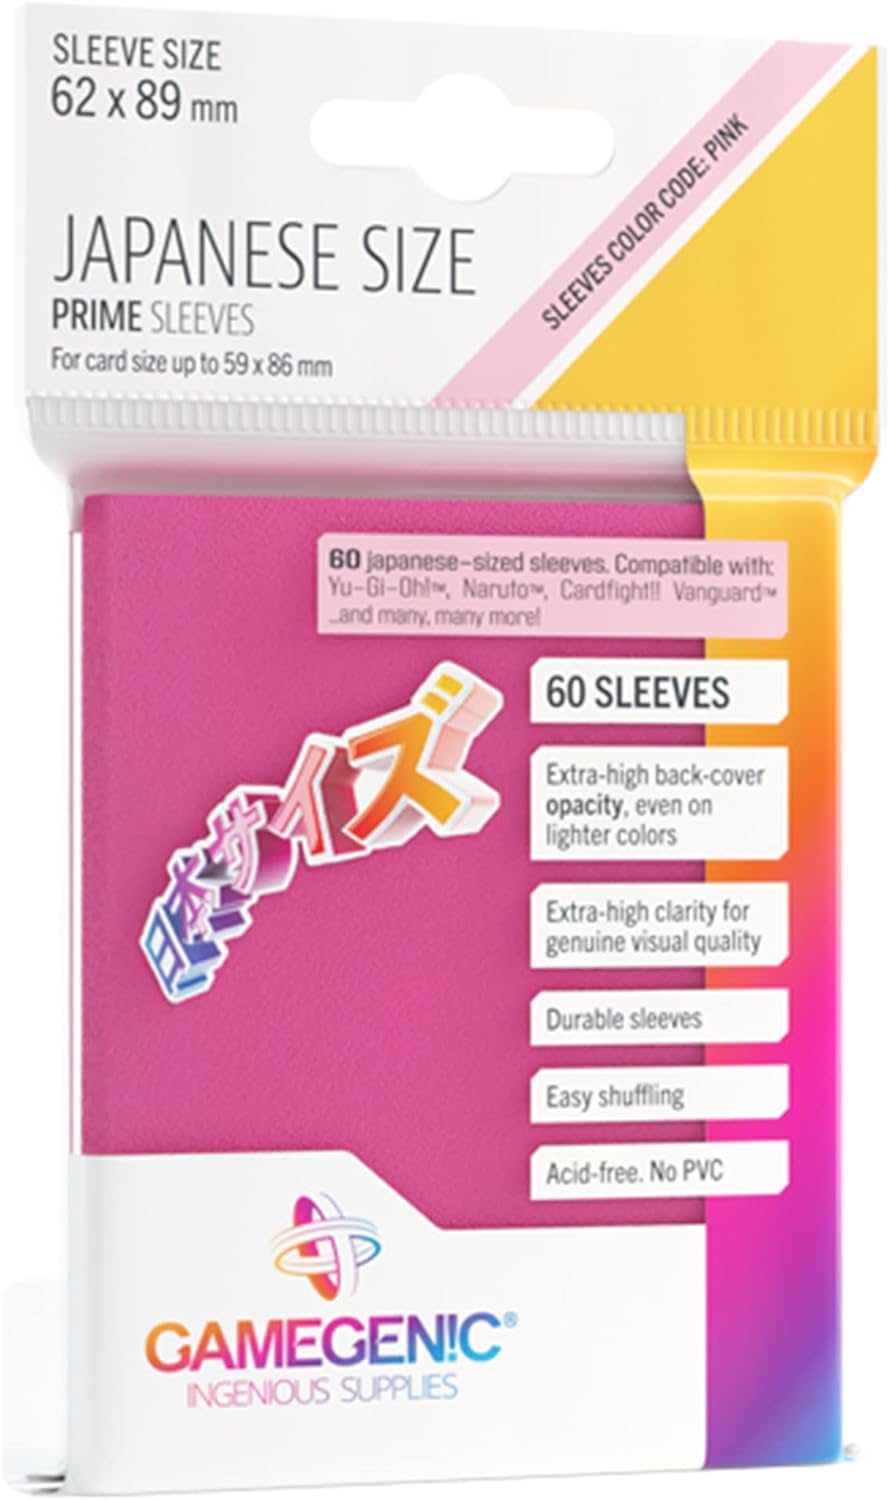 Prime Japanese Size Card Sleeves | Pack of 60 62 mm by 89 mm Card Sleeves